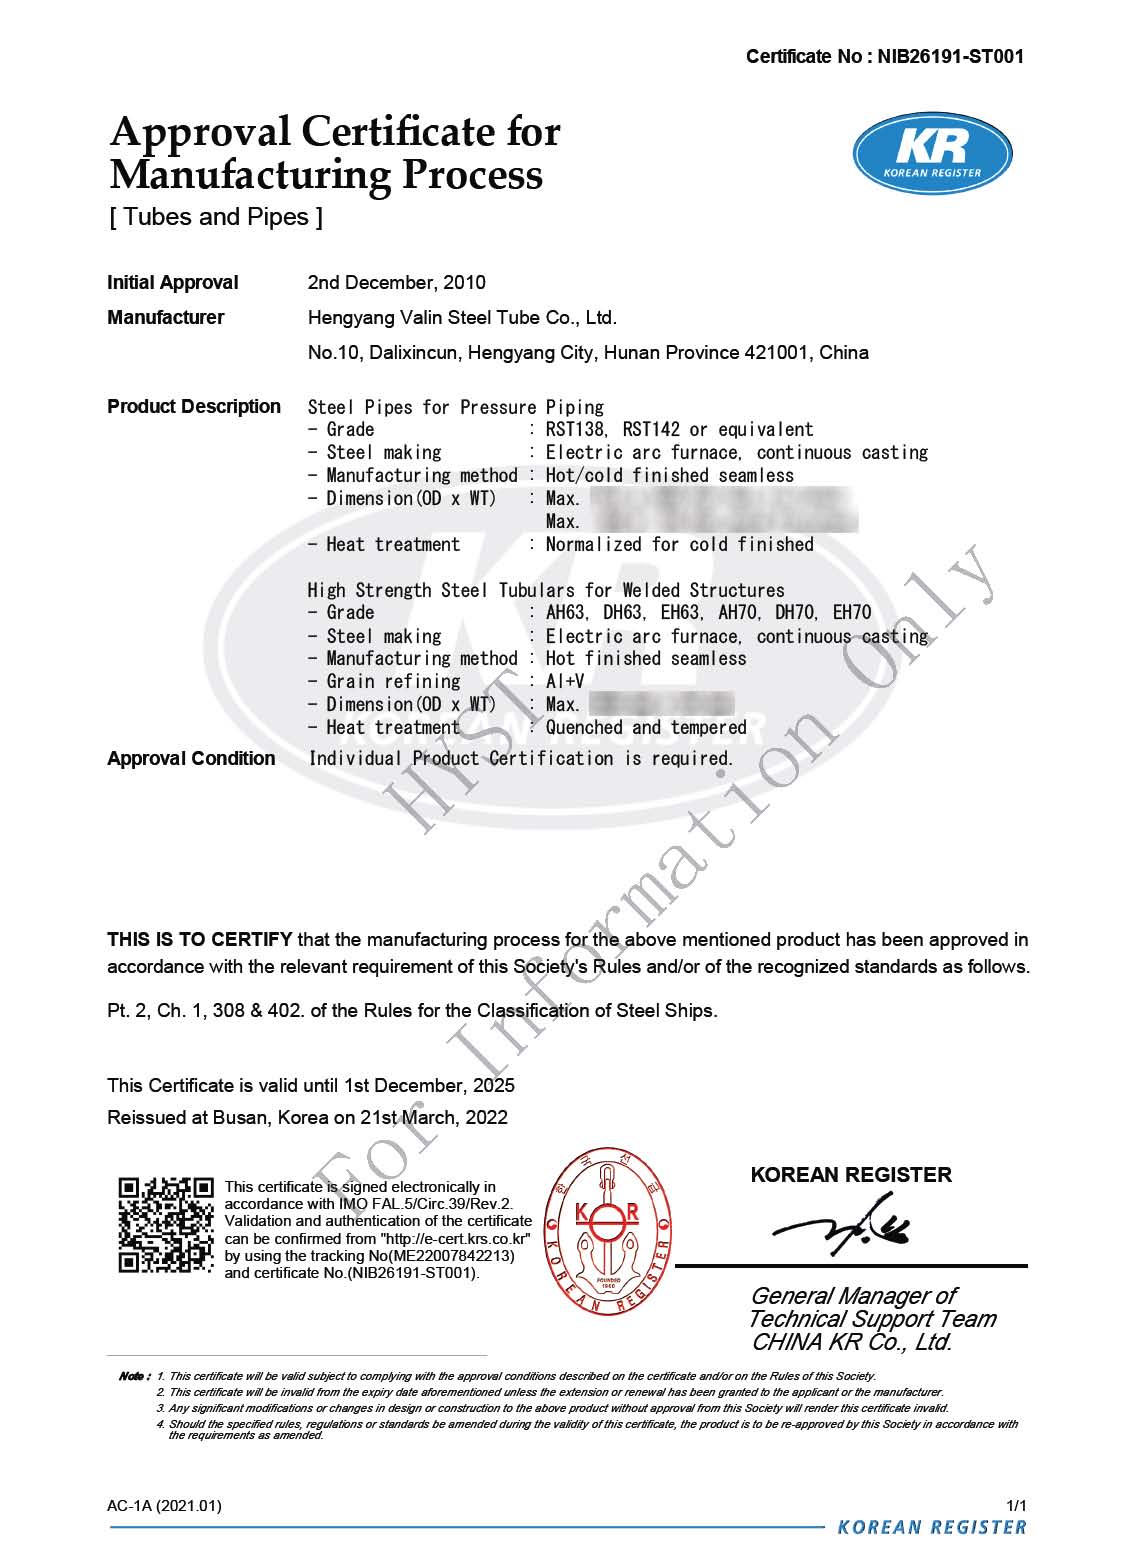 KR Certificate for Structural Steel Pipes